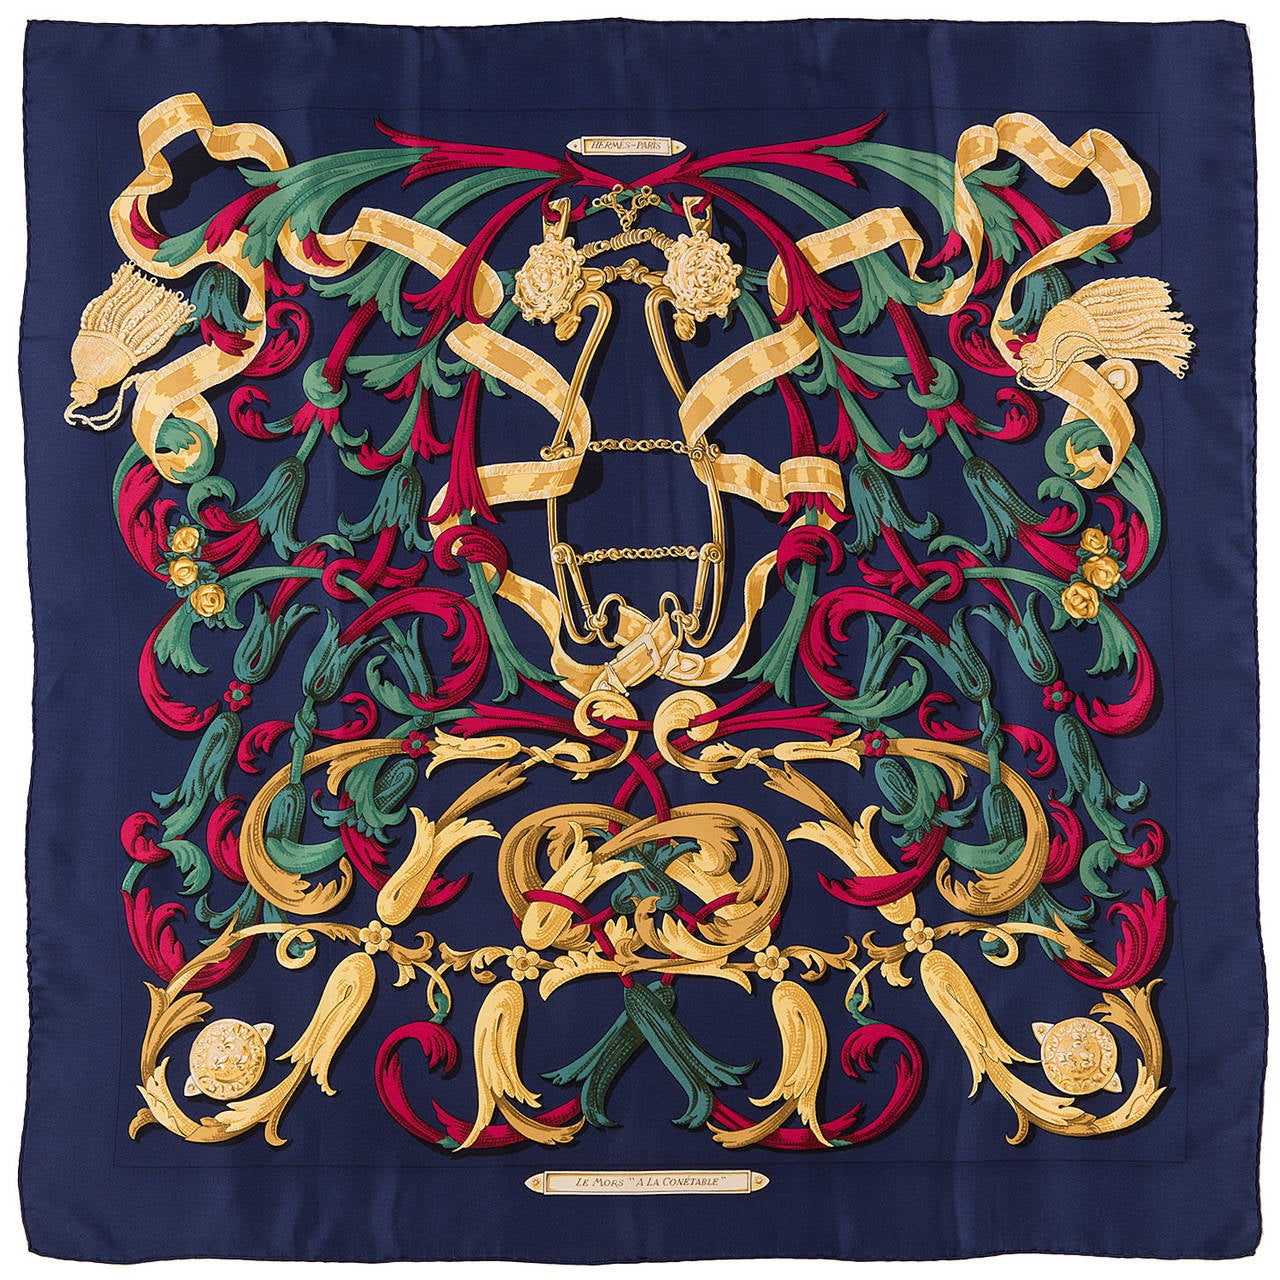 The legendary Henri d'Origny. This rare vintage Hermes Silk Scarf is by one of the most famous of Hermes designers and is in excellent condition. Designed in 1970, the rich colours of the scarf are still vibrant and strong. This scarf is a rare find